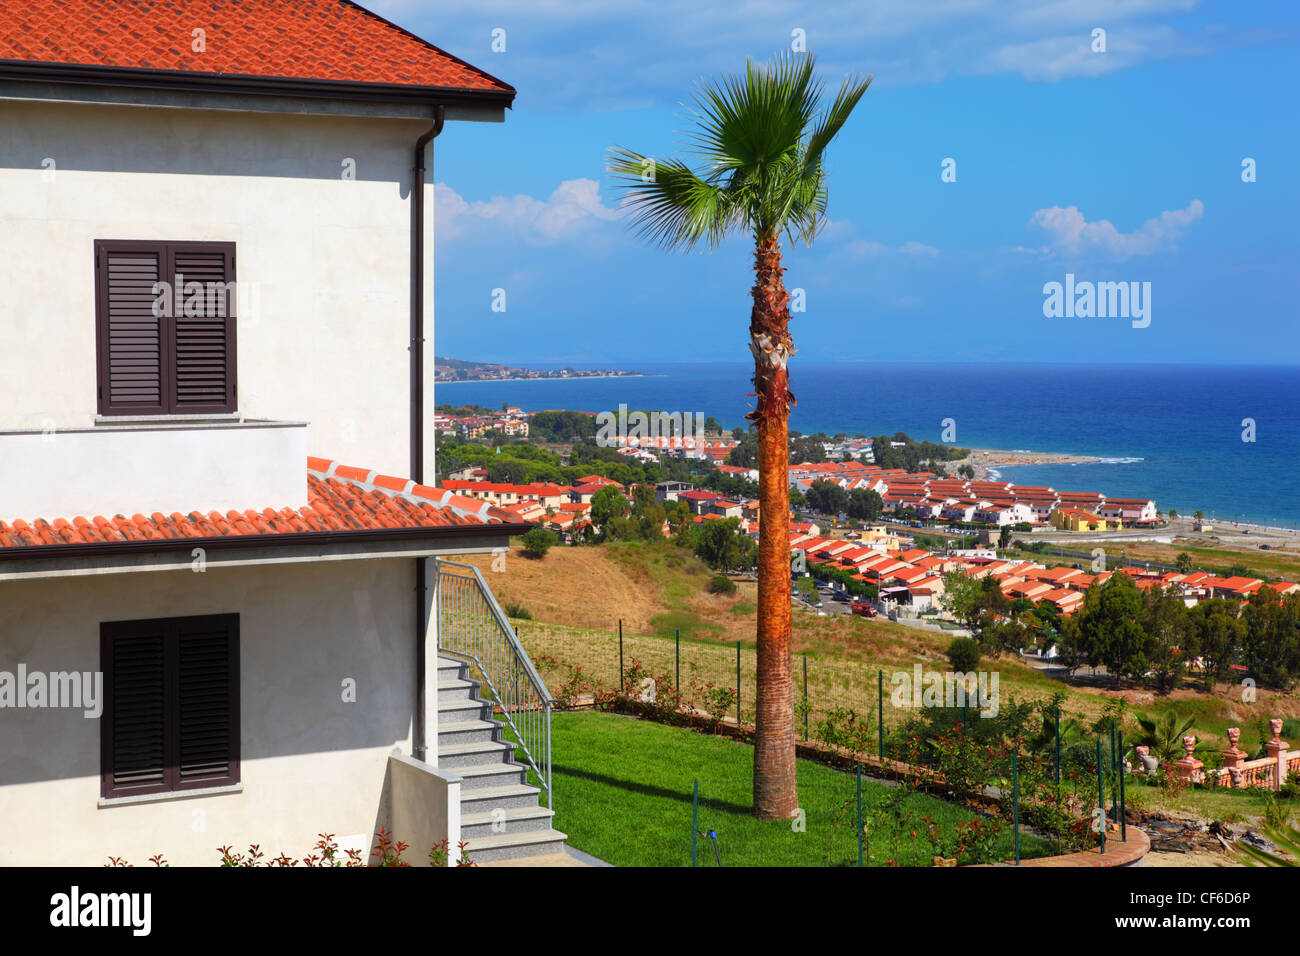 Big white two-story house with brown roof, palm trees and stairs on coast at city Stock Photo